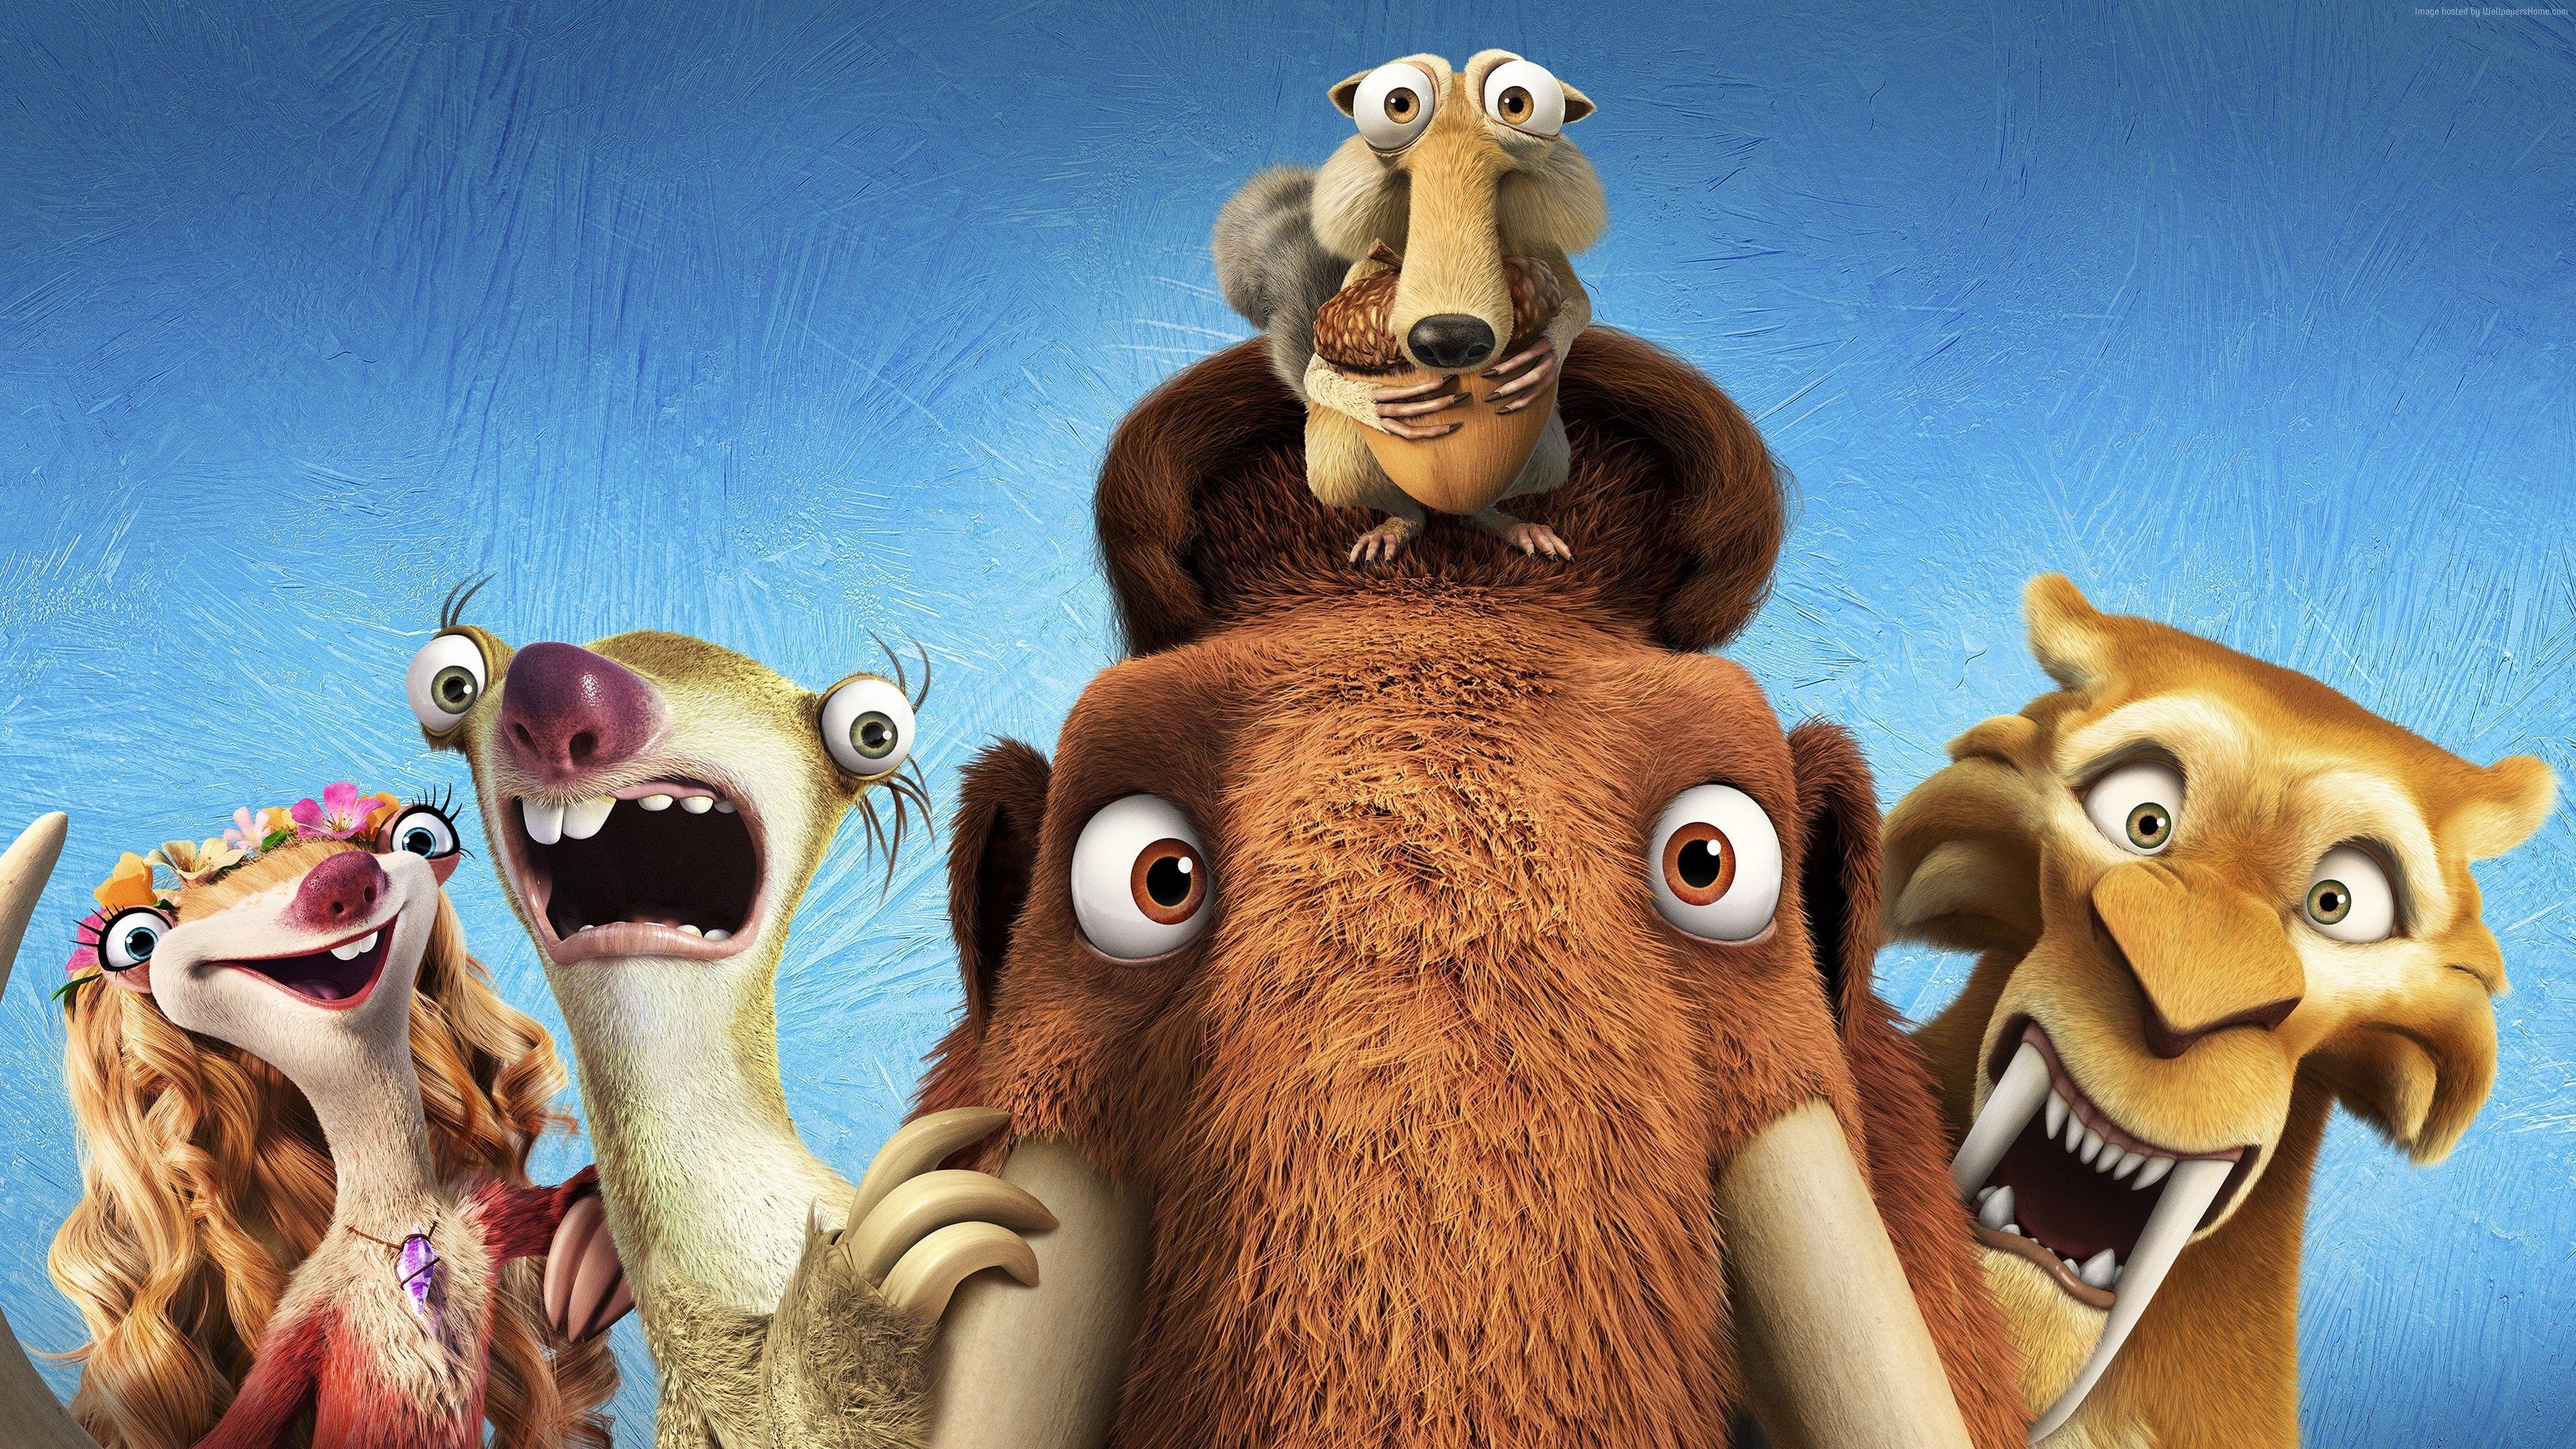 Wallpaper Ice Age 5: Collision Course, diego, manny, scrat, sid